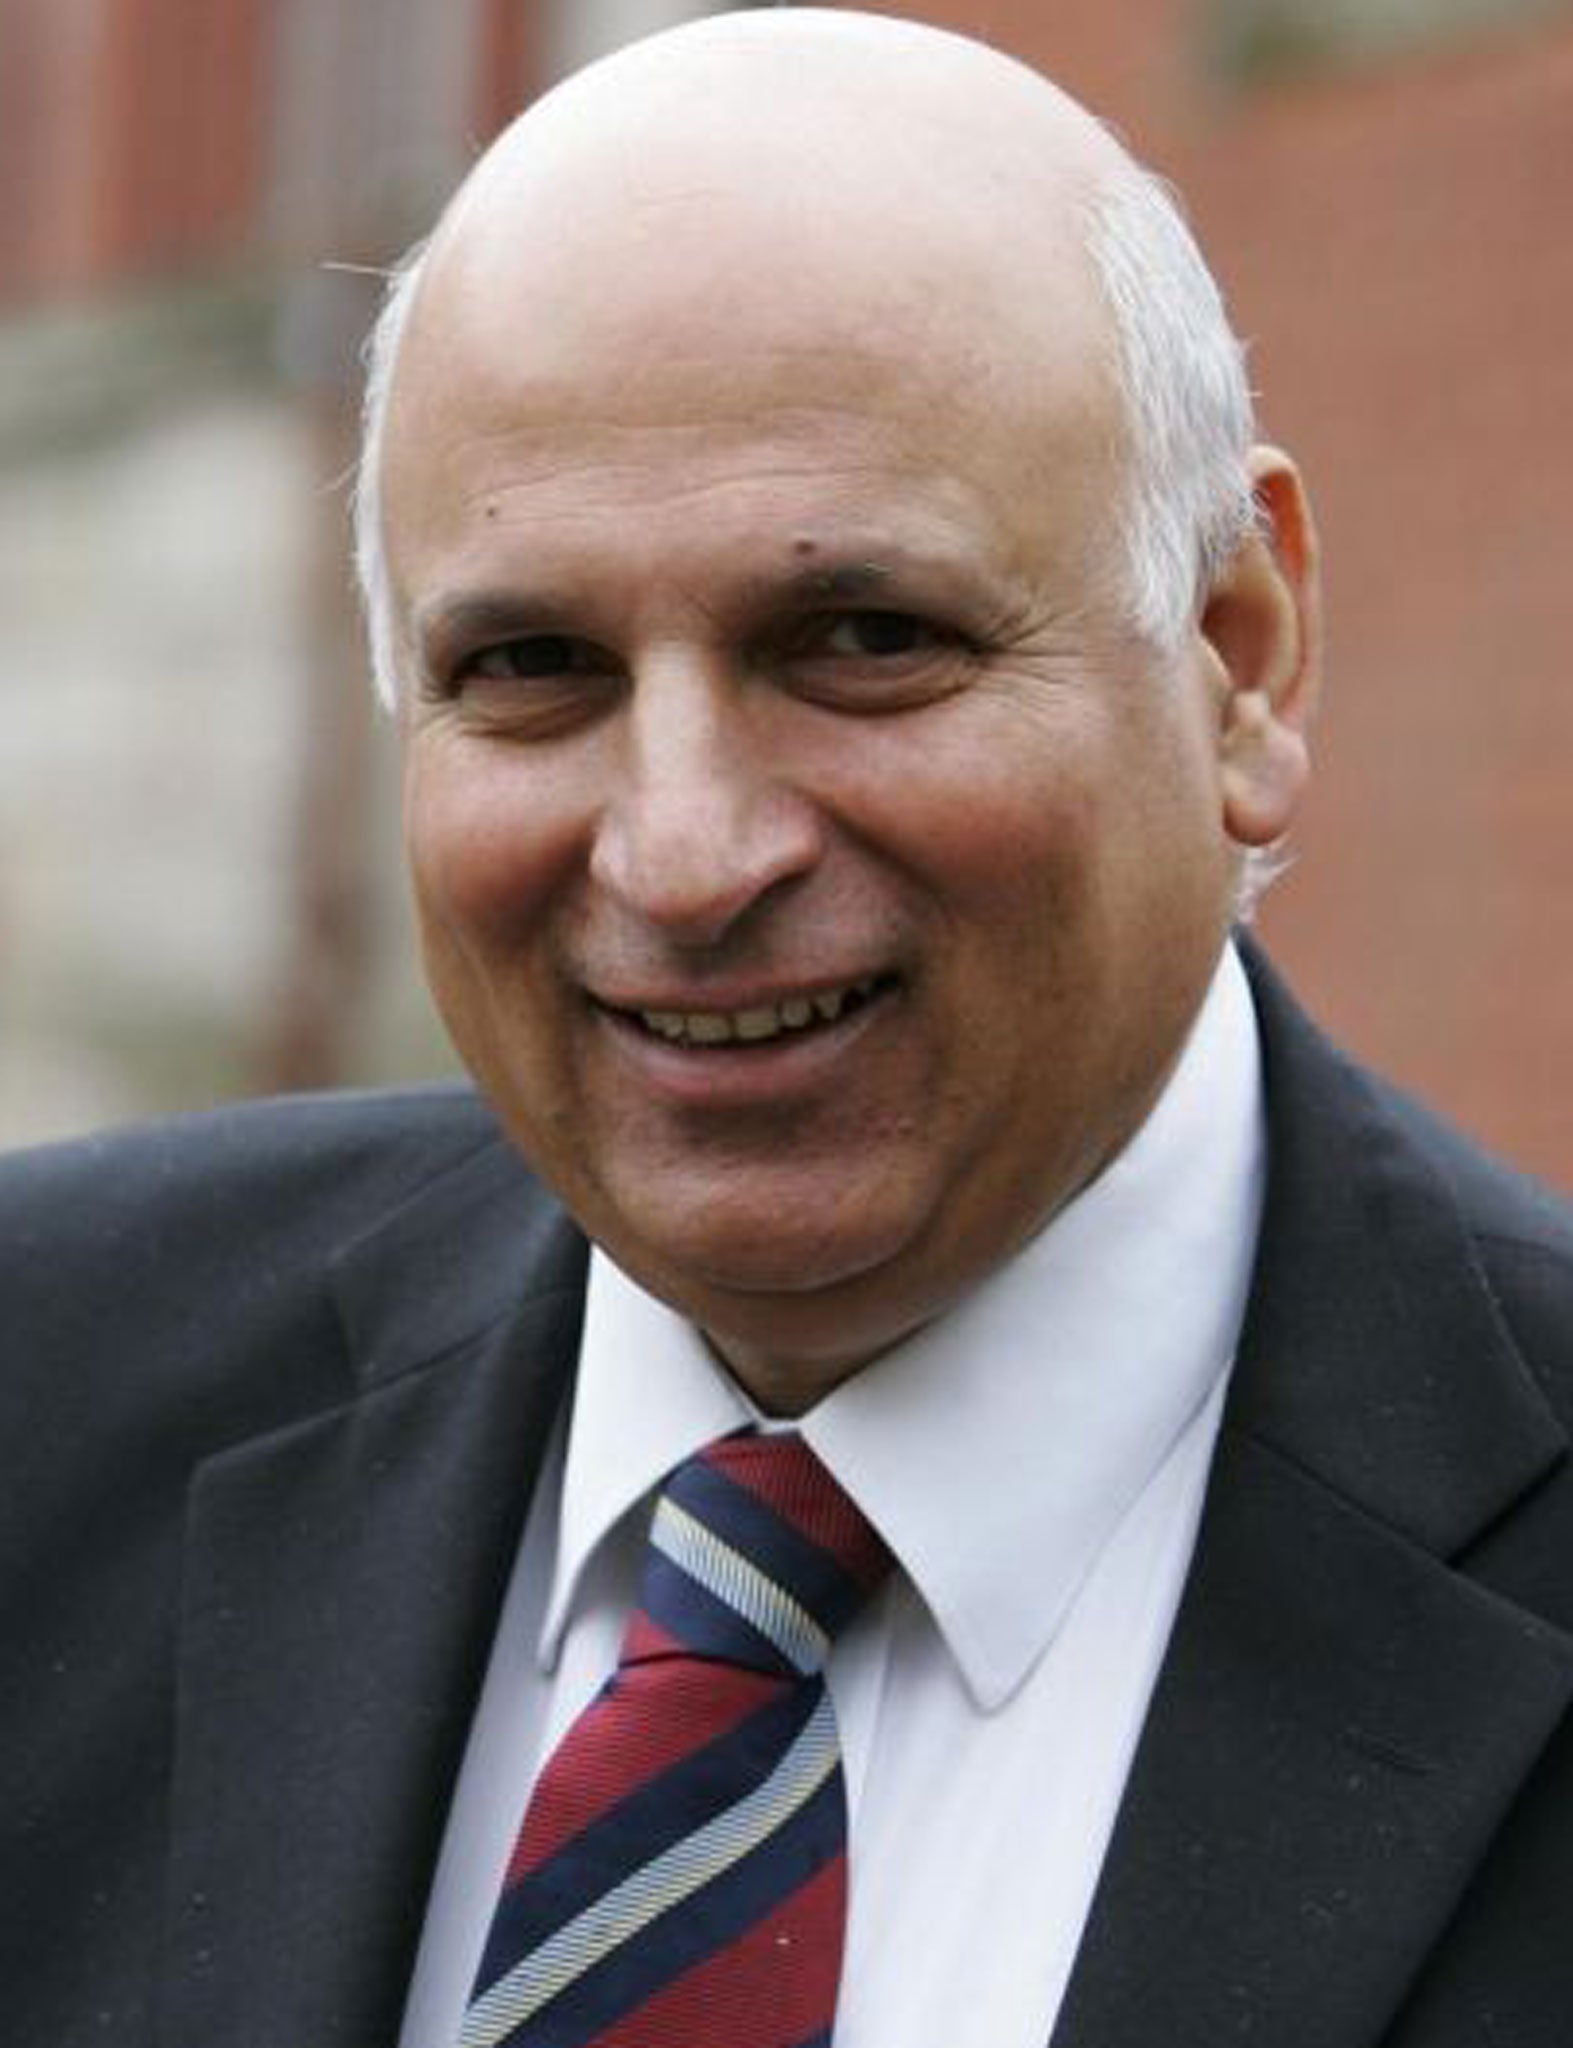 Mohammad Sarwar was an MP for Glasgow from 1997 to 2010